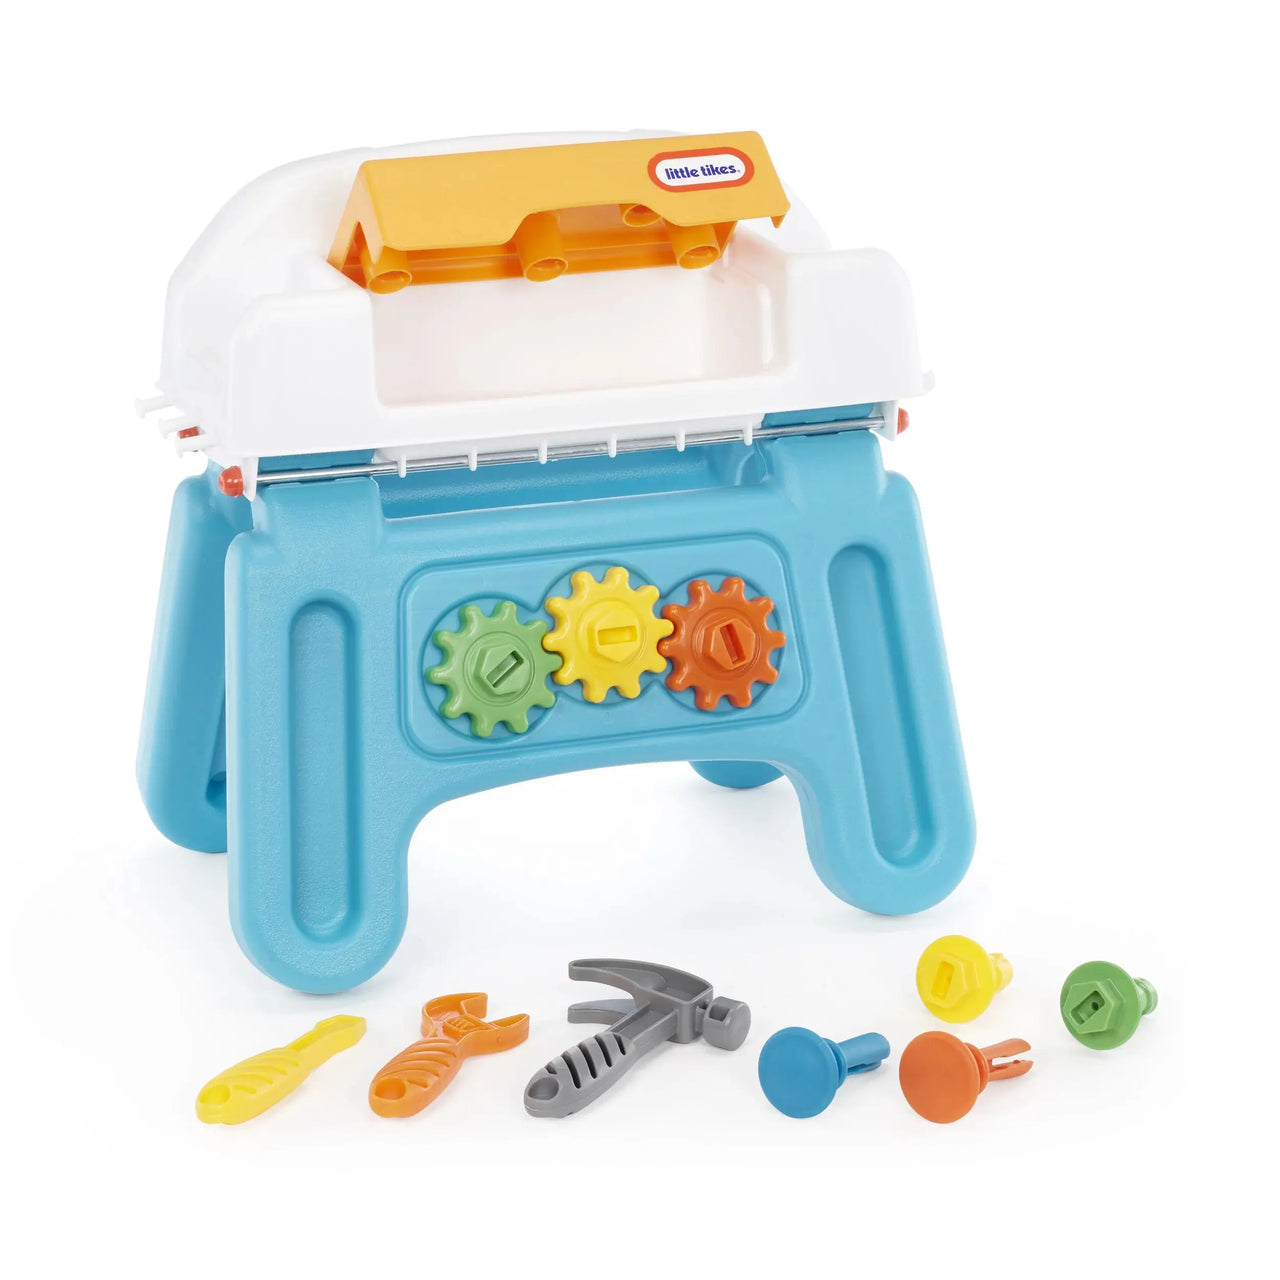 Little Tikes First Tool Bench Master Kids Company Little Tikes 